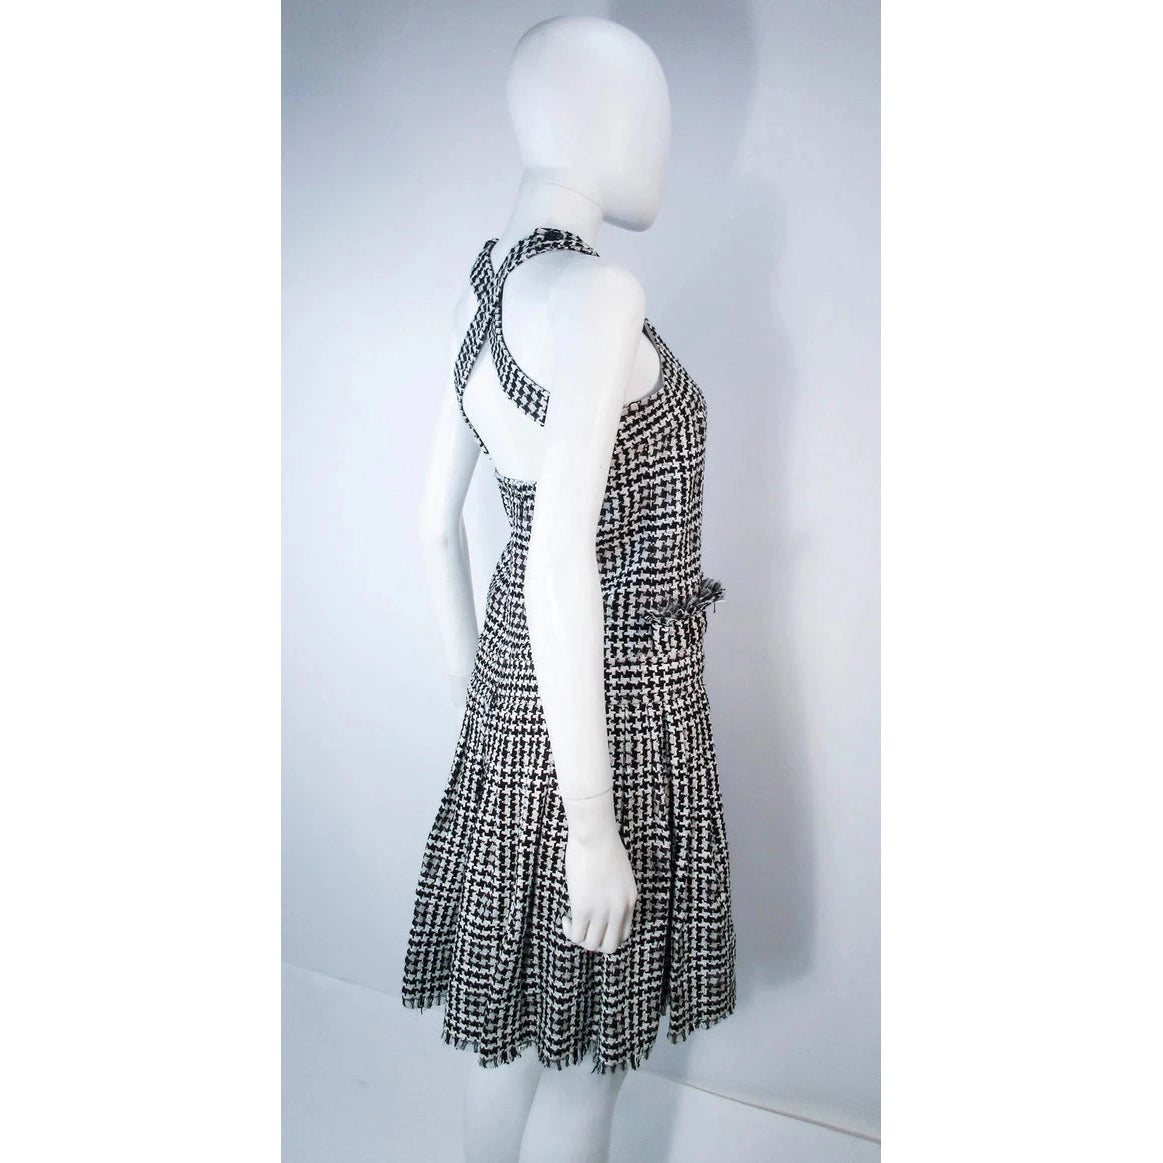 CHANEL Black and White Tweed Criss Cross Back Dress